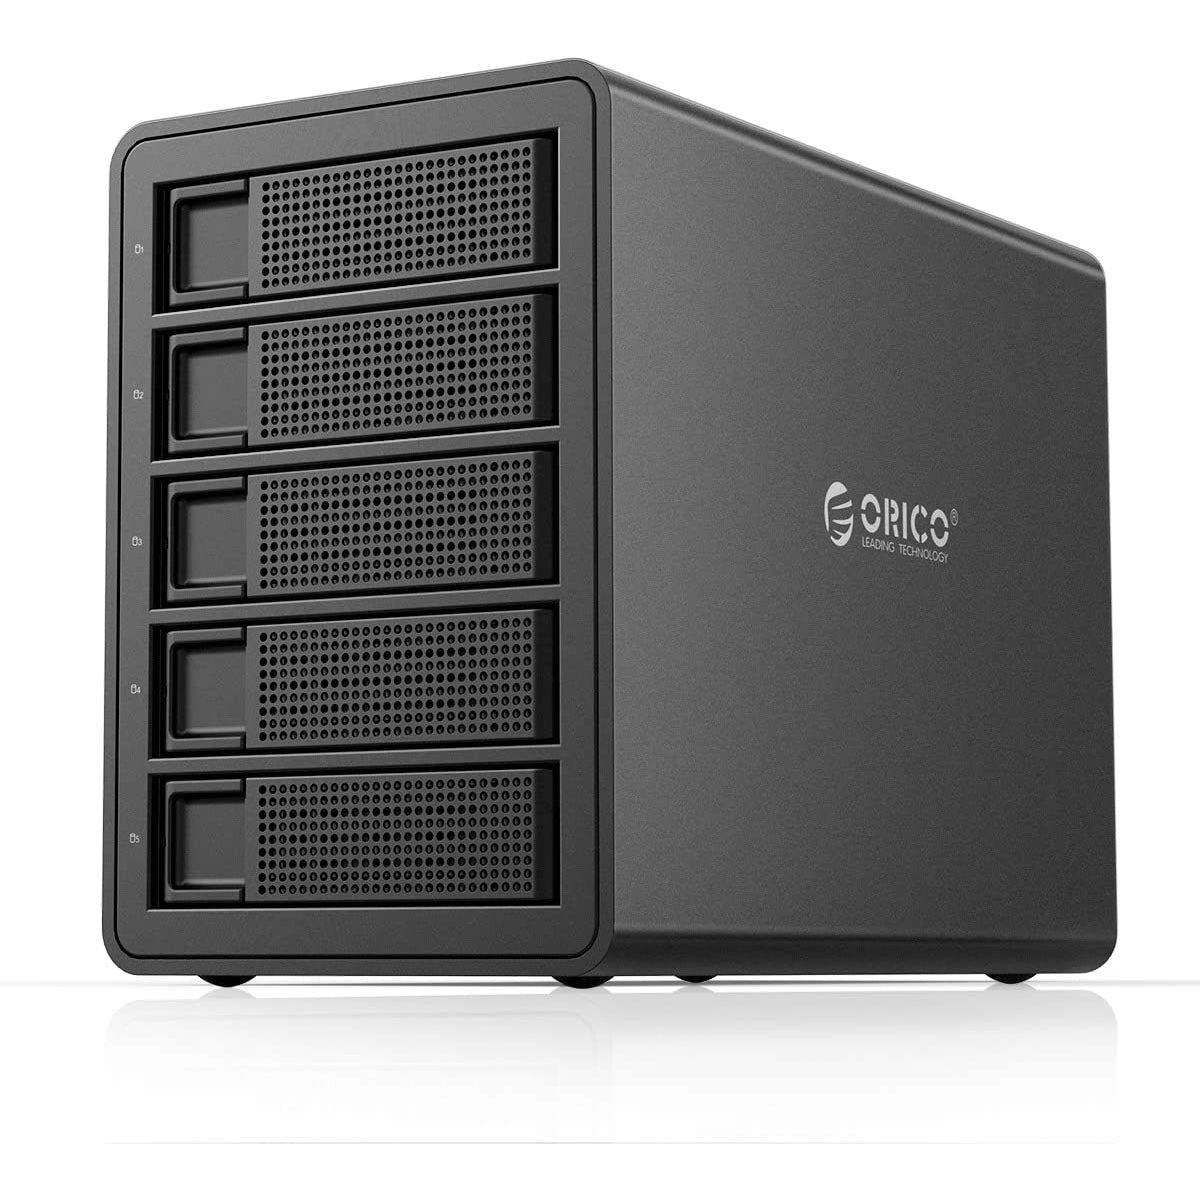 Orico 5 Bay USB 3.0 to SATA External Hard Drive Enclosure Support 80TB, 2.5/3.5 inch HDD SSD Enclosure Built-in 150W Power/Dual Chip